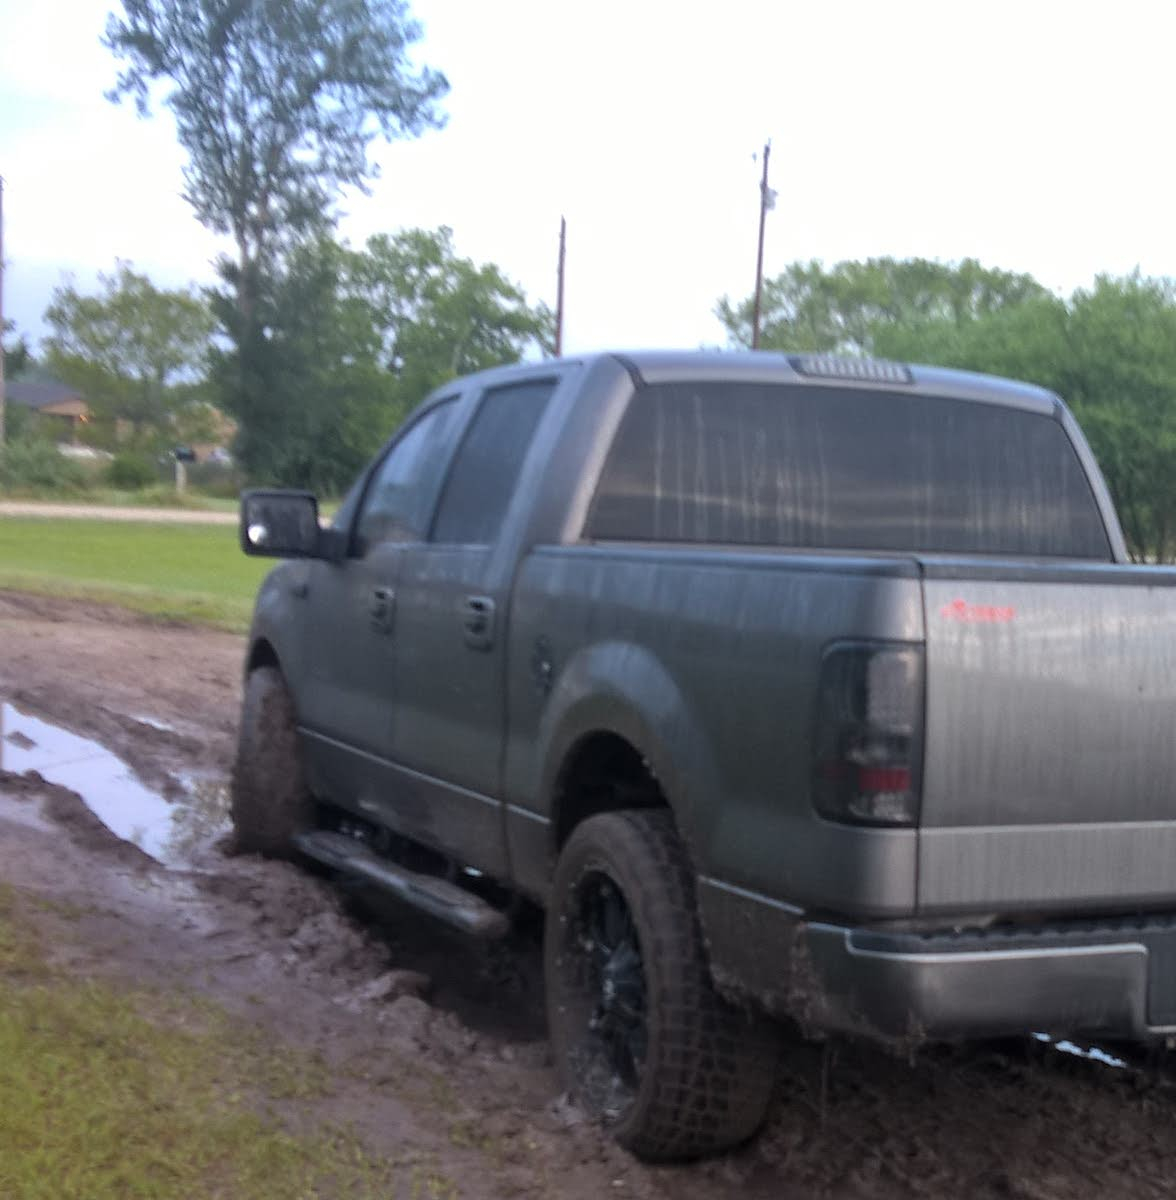 Ford F-150 Questions - 2006 F-150 5.4 Triton, Backfires And